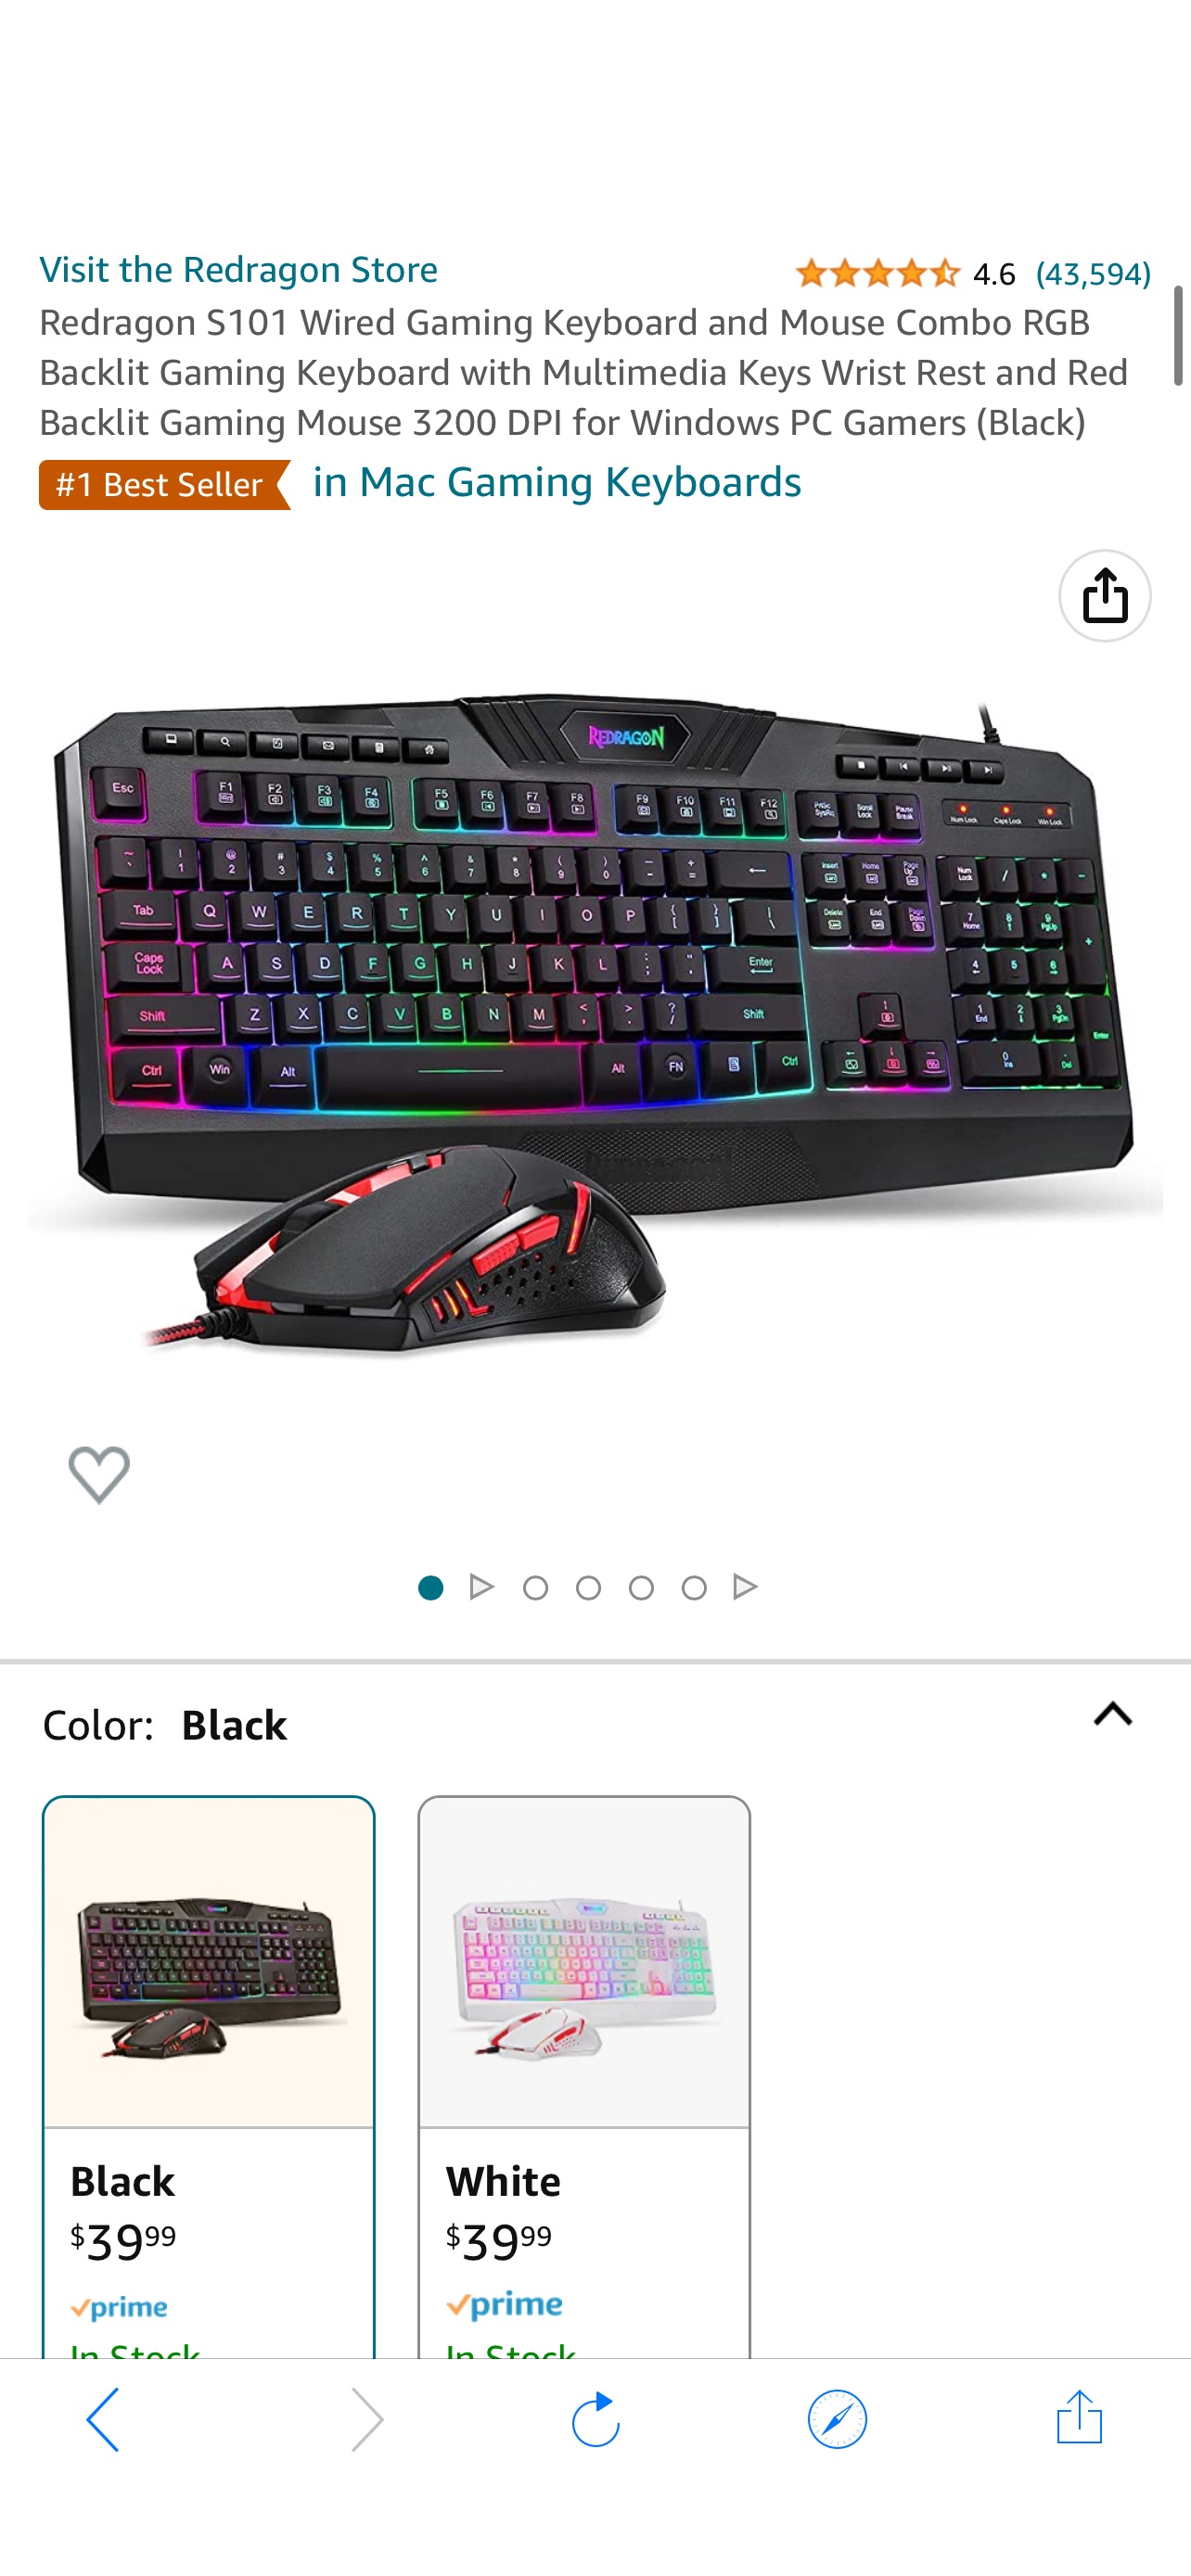 Amazon.com: Redragon S101 Wired Gaming Keyboard and Mouse Combo RGB Backlit Gaming Keyboard with Multimedia Keys Wrist Rest and Red Backlit Gaming Mouse 3200 DPI for Windows PC Gamers (Black)